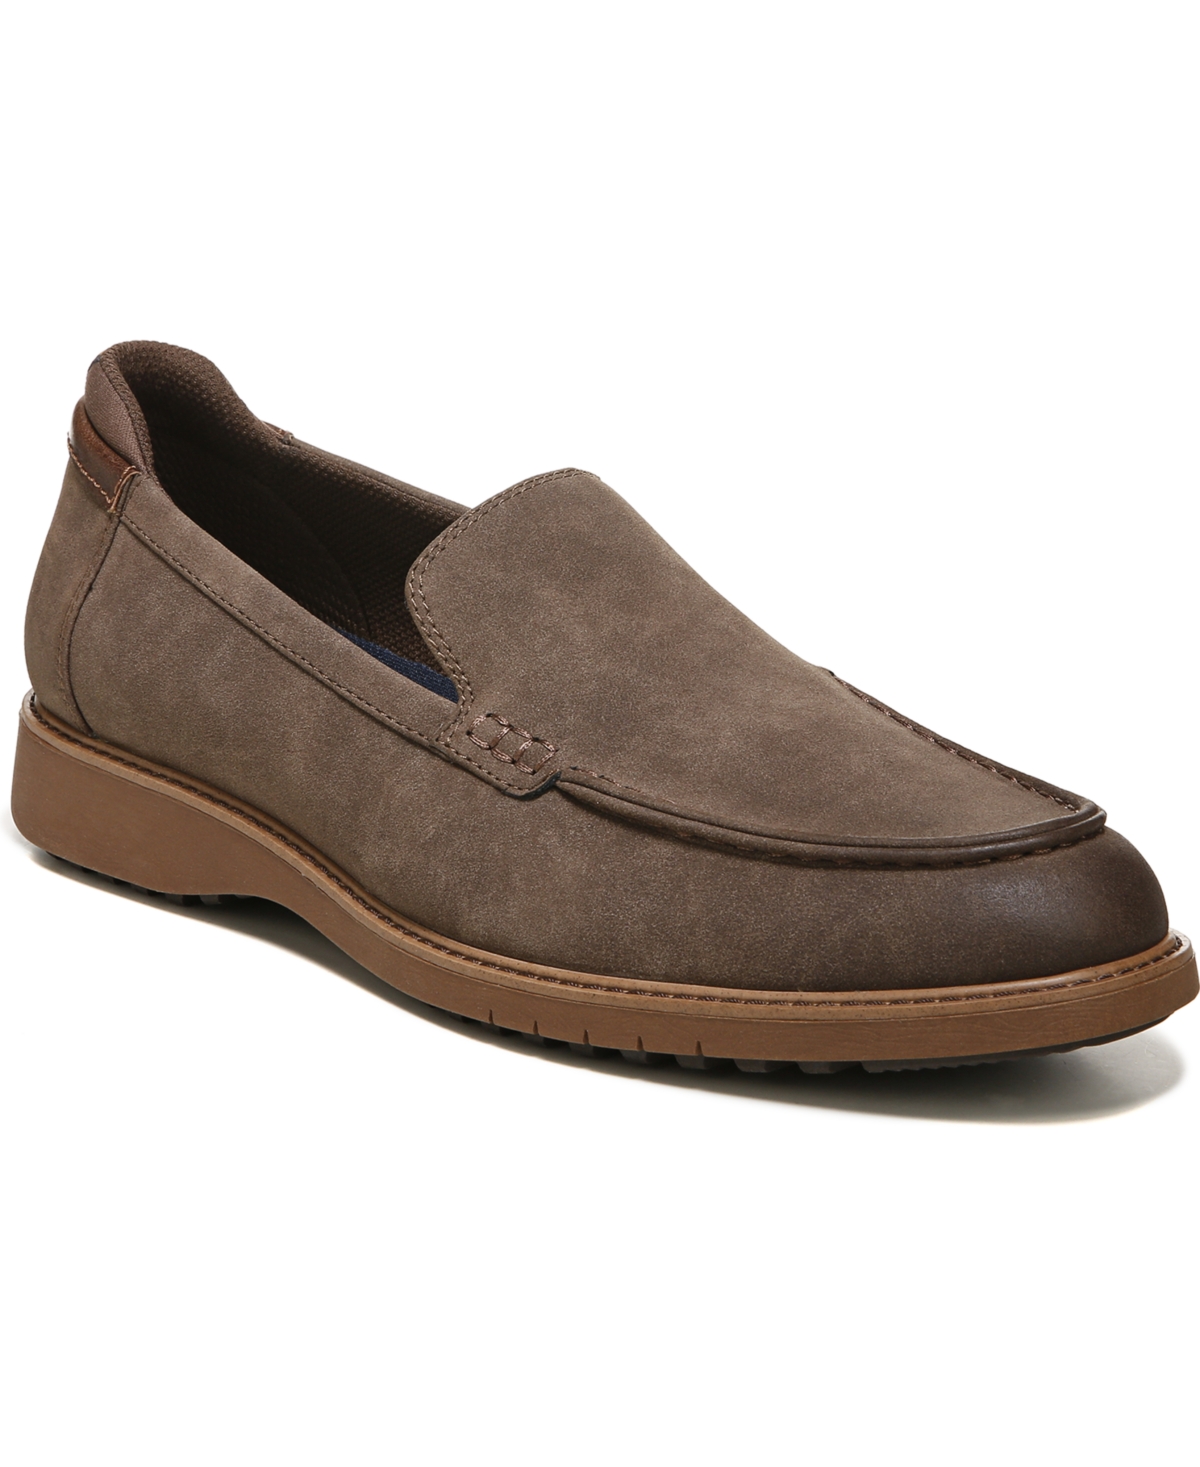 Men's Sync Up Moc Slip-Ons Loafer - Chestnut Brown Synthetic